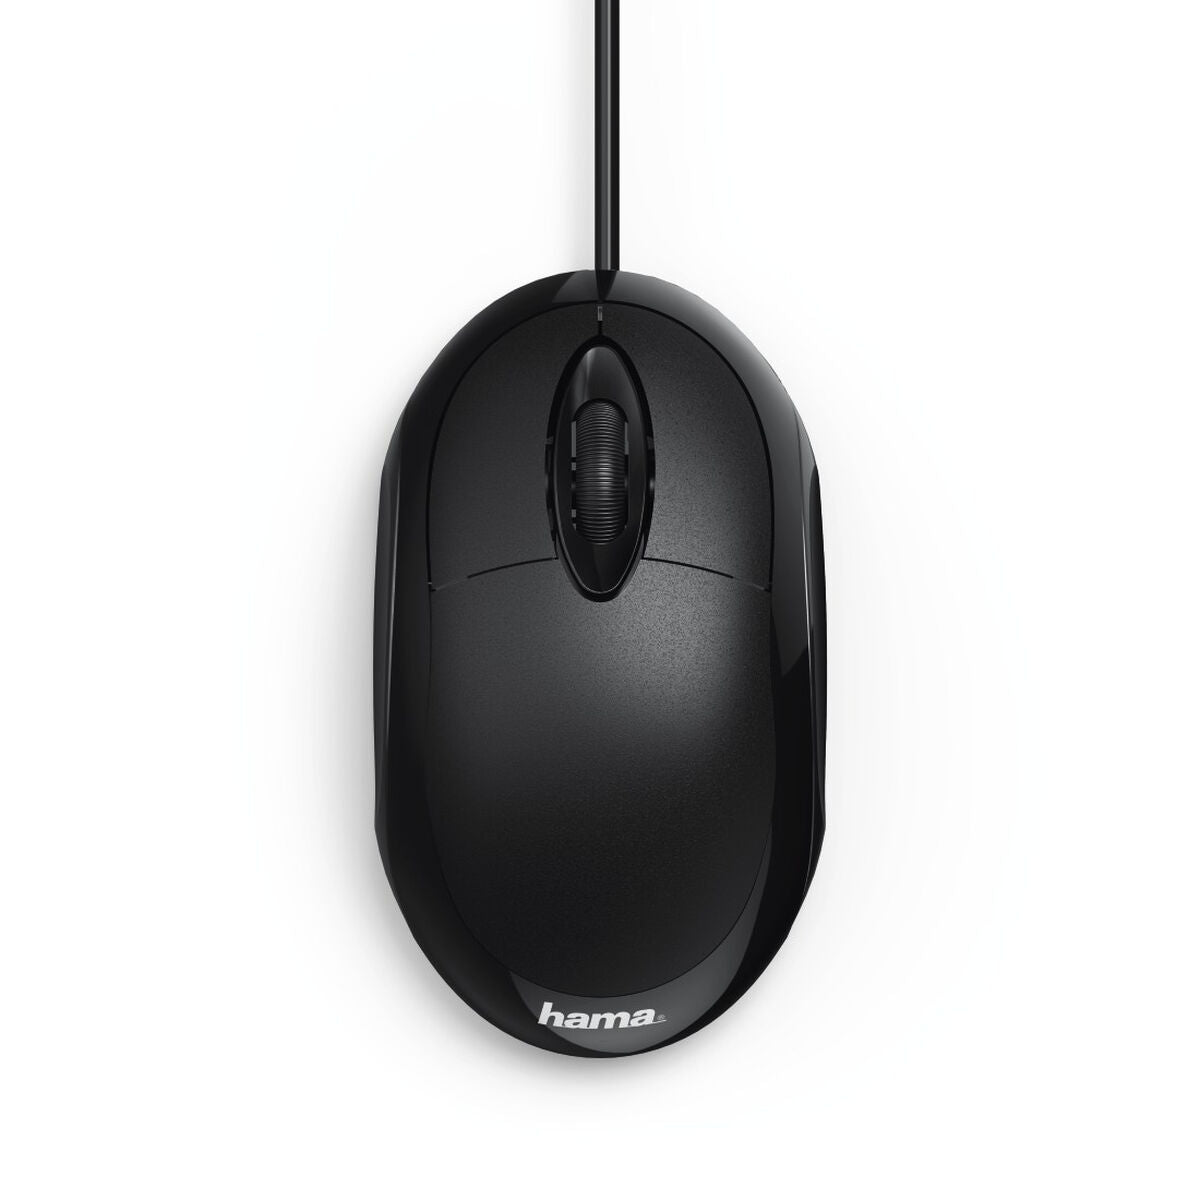 Optical mouse Hama Technics 00182600 Black 1000 dpi, Hama Technics, Computing, Accessories, optical-mouse-hama-technics-00182600-black-1000-dpi, Brand_Hama Technics, category-reference-2609, category-reference-2642, category-reference-2656, category-reference-t-19685, category-reference-t-19908, category-reference-t-21353, computers / peripherals, Condition_NEW, office, Price_20 - 50, Teleworking, RiotNook